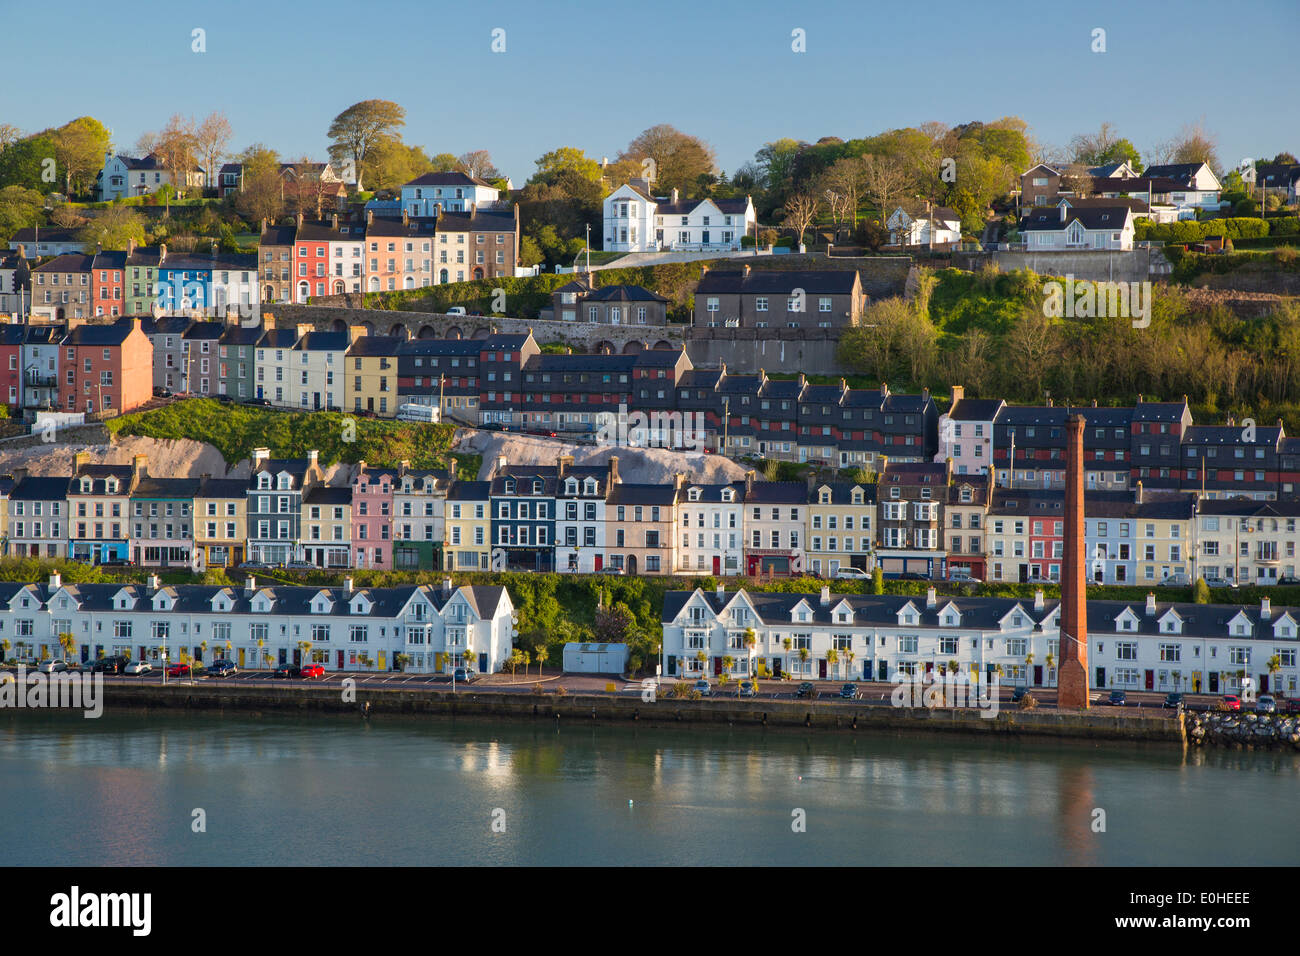 Harbor town of Cobh - RMS Titanic's final port of call, County Cork, Ireland Stock Photo